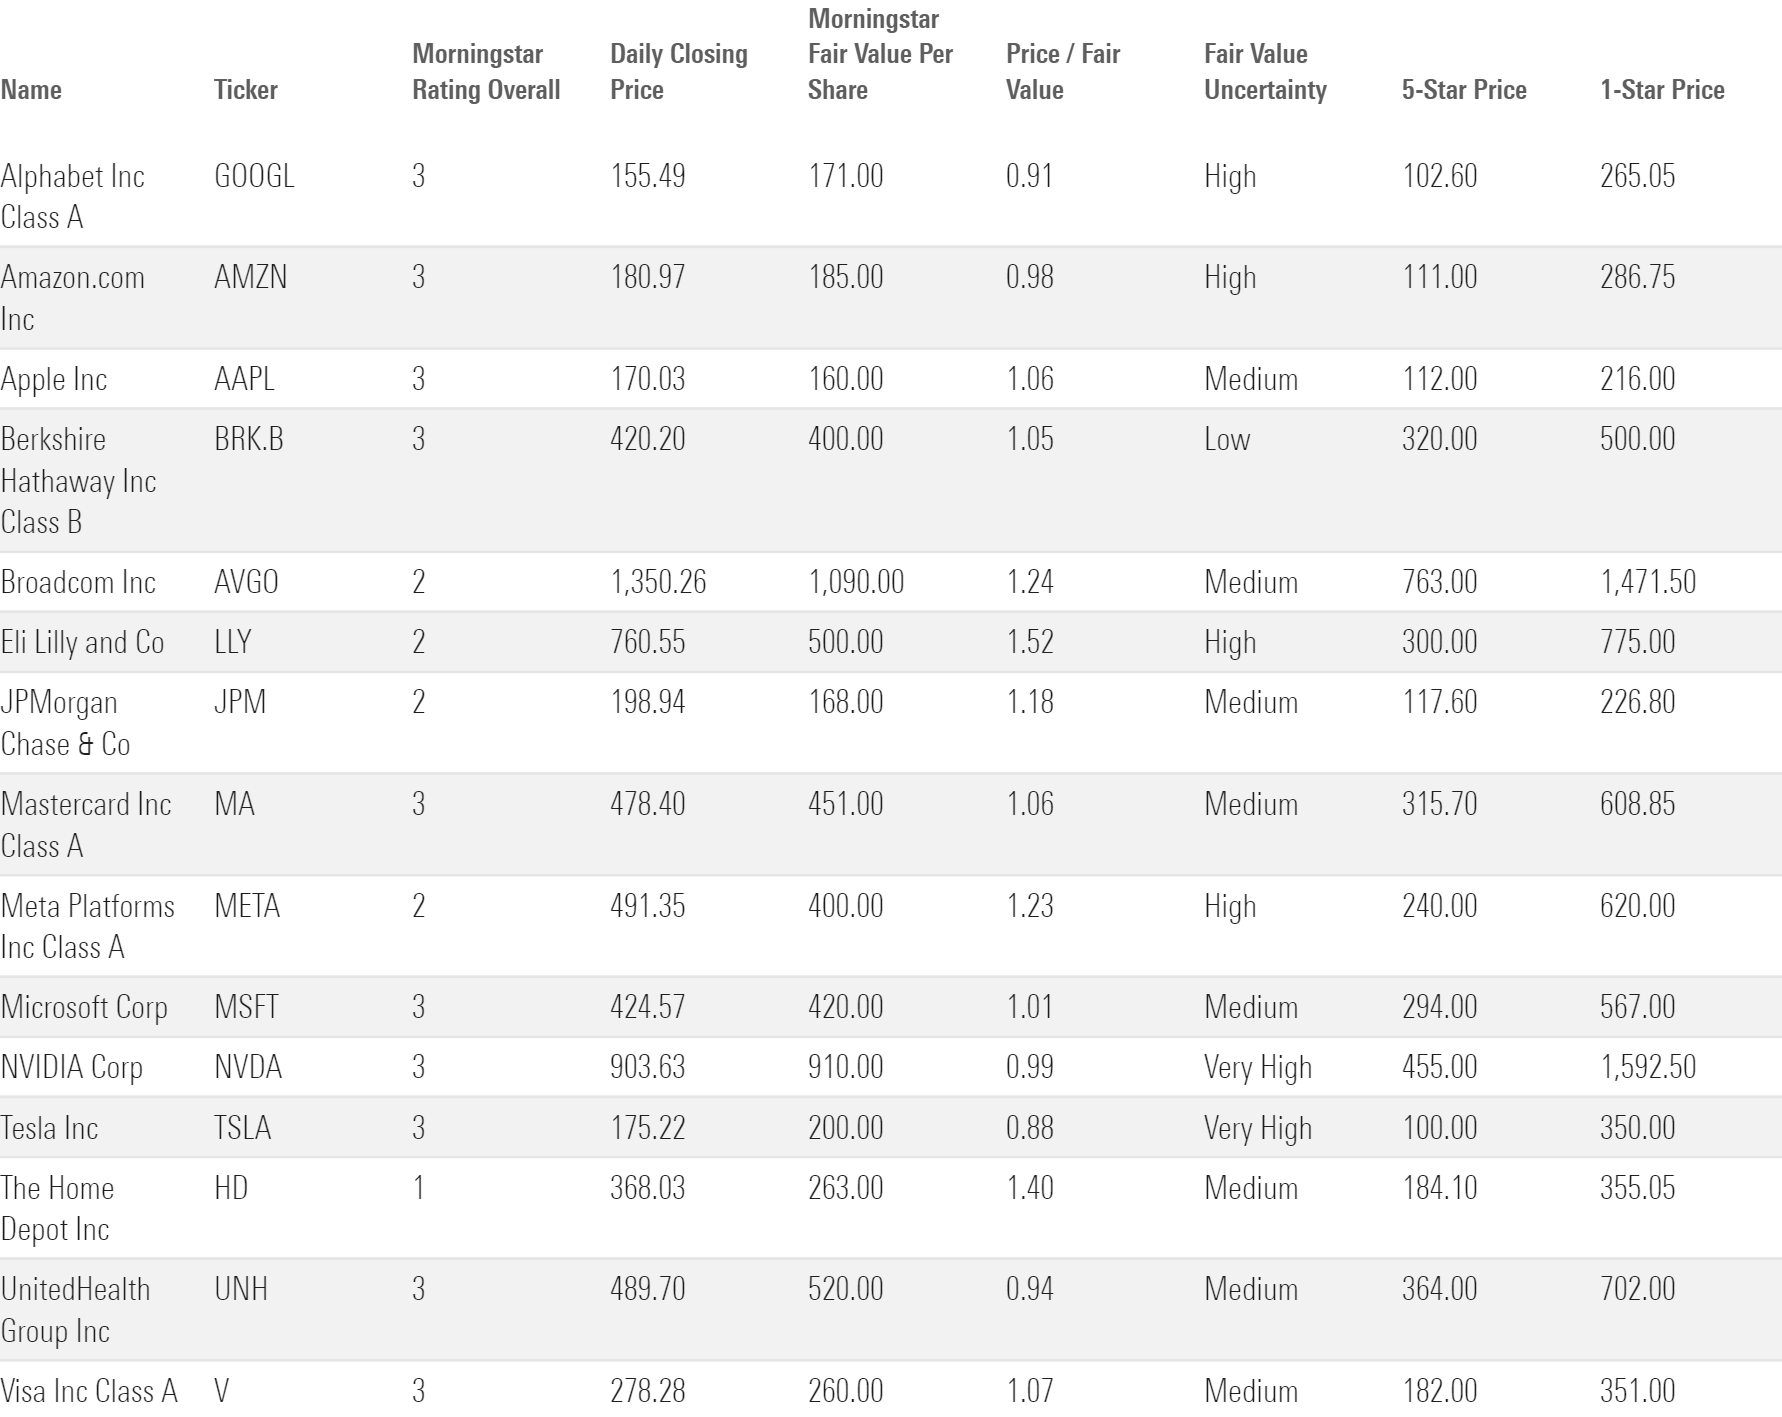 A table showing Morningstar Ratings and valuation statistics for the top 15 wealth-creating stocks.